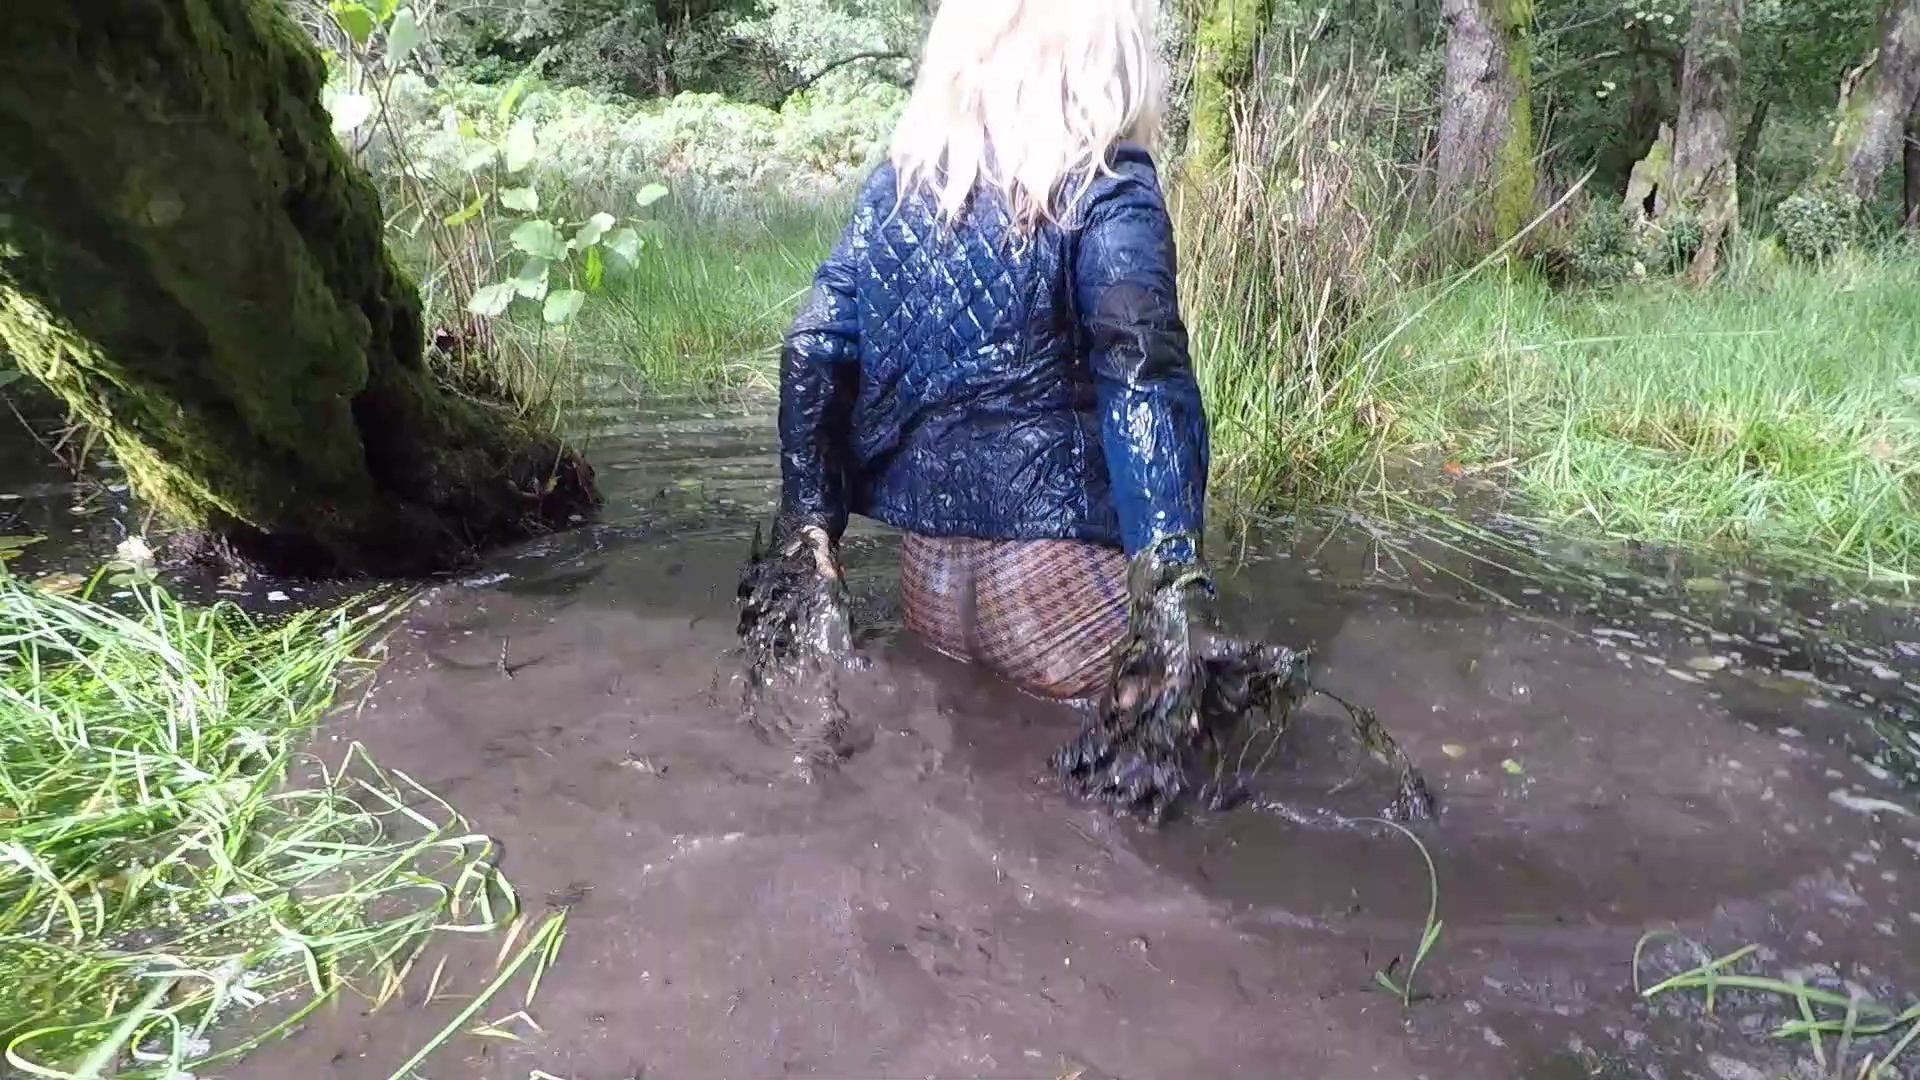 wet messy and muddy boots quicksand visuals